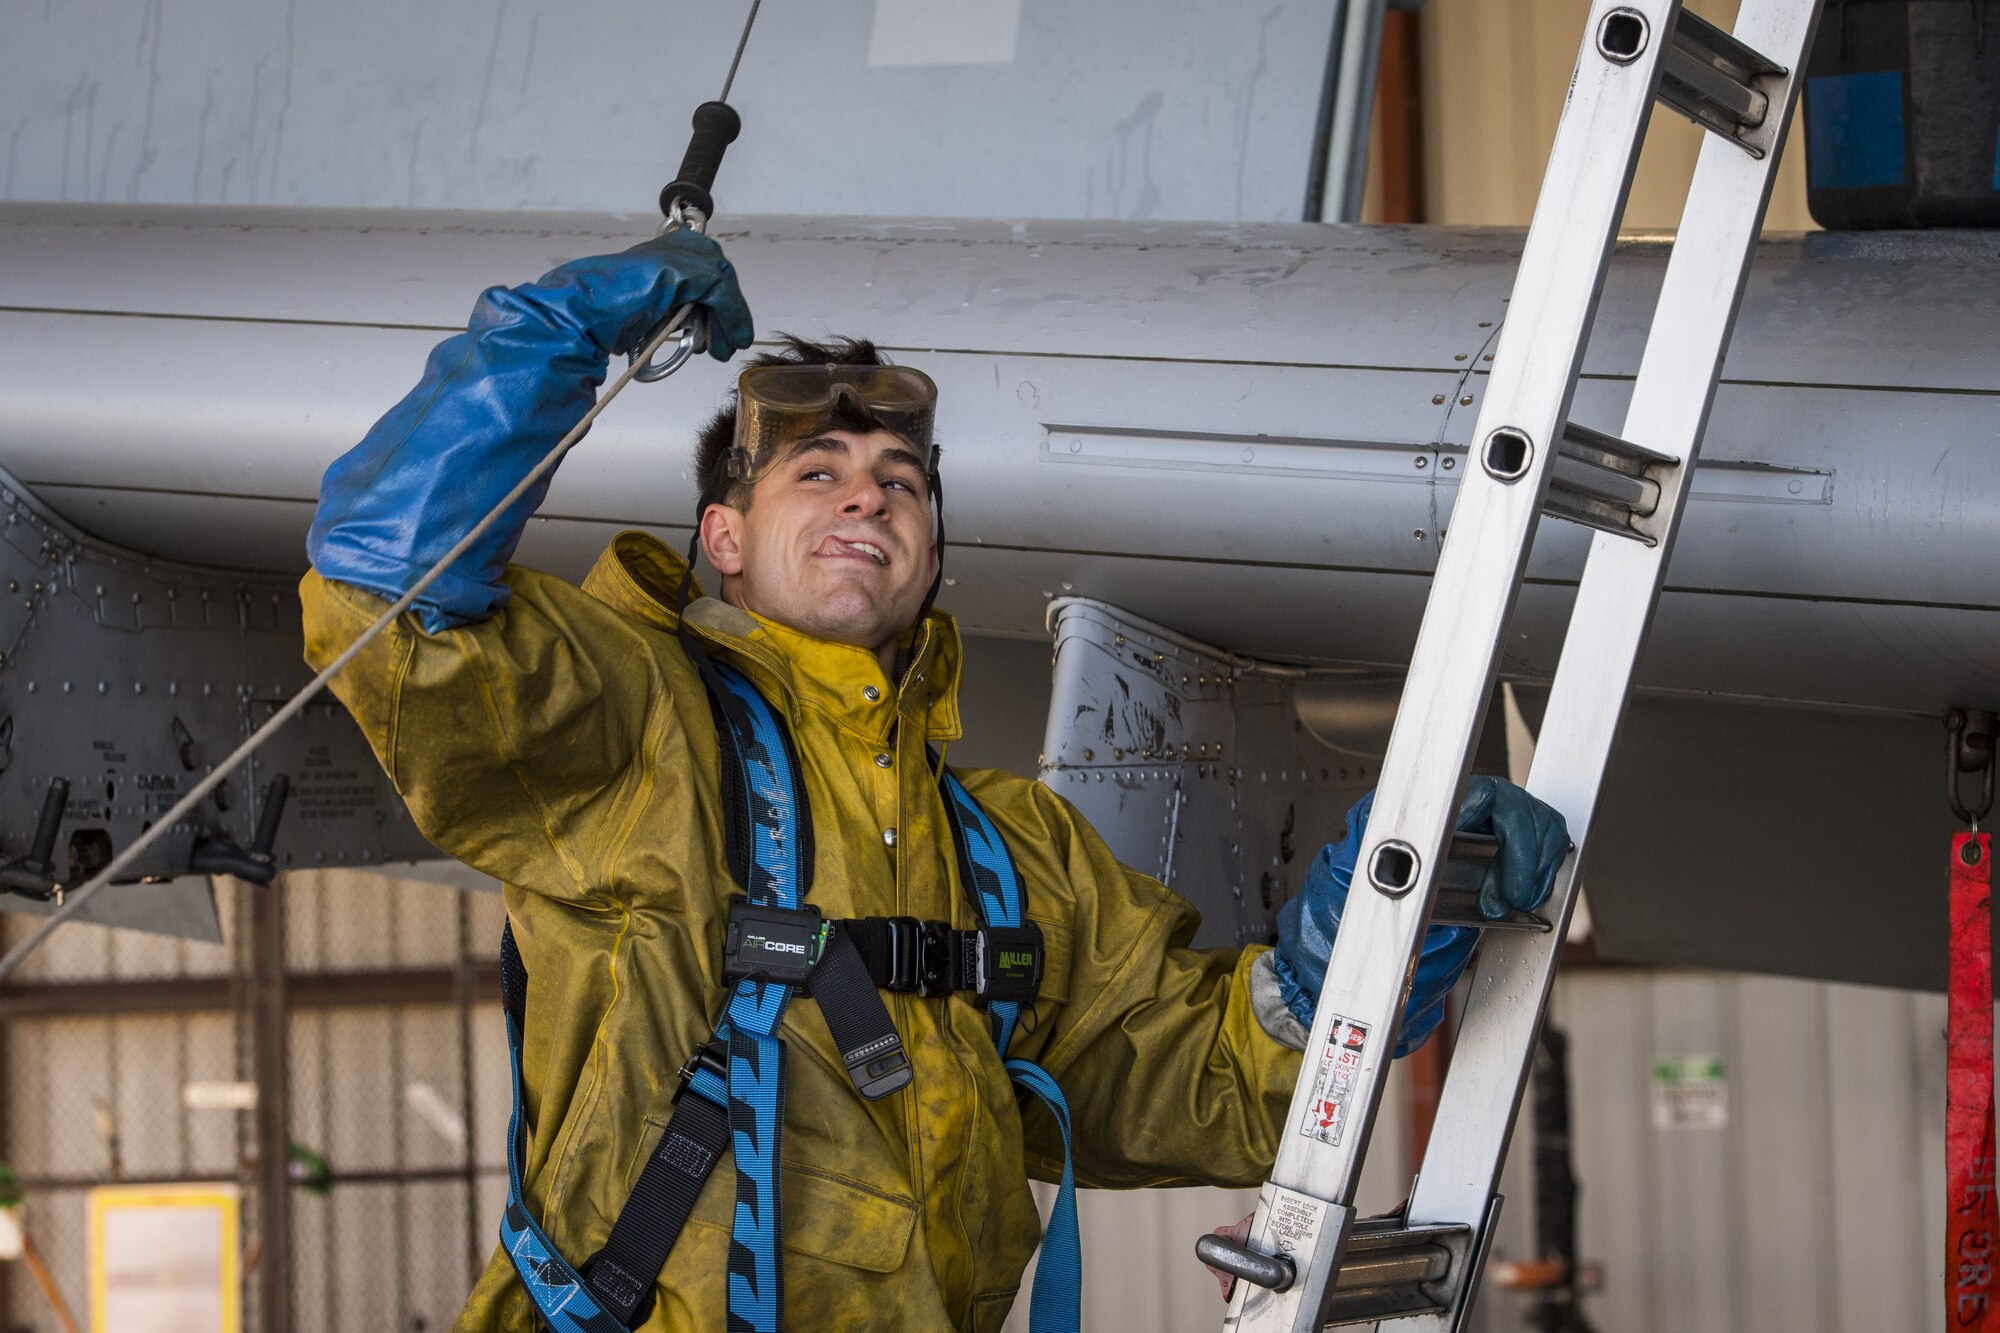 Airman 1st Class Jake Dromgold, 74th Aircraft Maintenance Unit crew chief, prepares to connect his harness to a hook, Feb. 8, 2018, at Moody Air Force Base, Ga. In addition to mechanical and electrical maintenance, A-10’s must be washed every 180 days or approximately 1,000 flying hours in order to control corrosion caused by residue from the gun and engine exhaust. (U.S. Air Force photo by Senior Airman Janiqua P. Robinson)